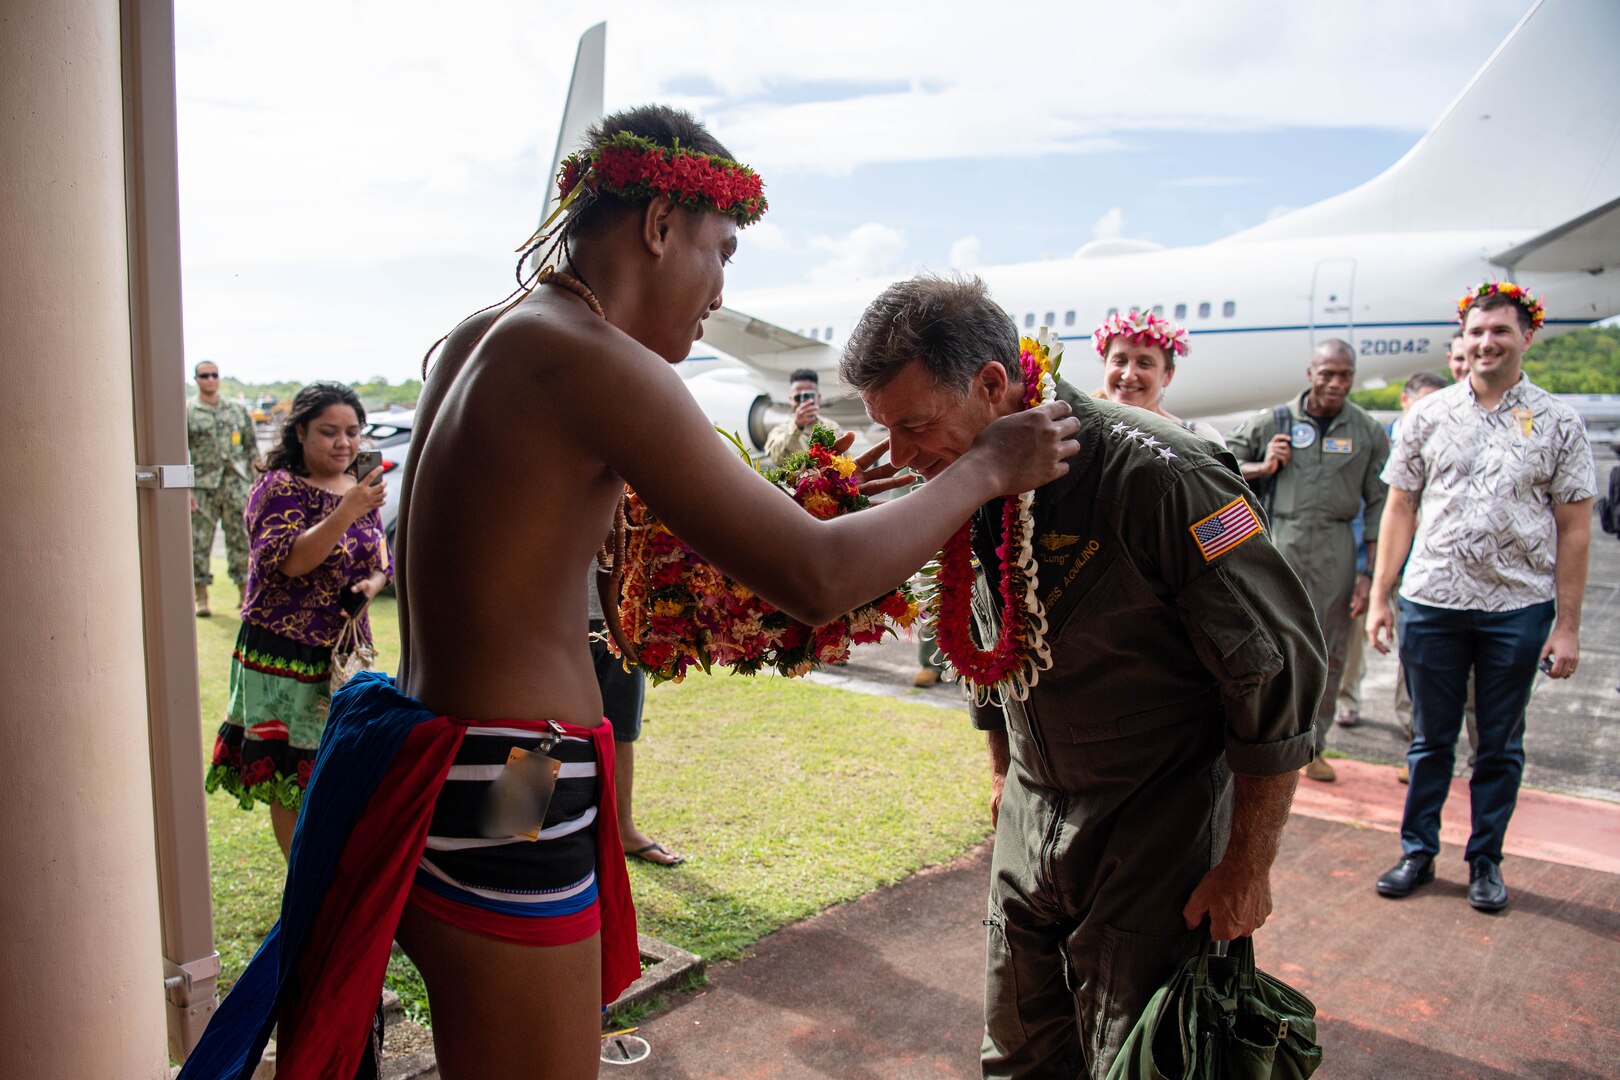 COLONIA, Yap, Federated States of Micronesia  (March 17, 2023) Adm. John C. Aquilino, Commander U.S. Indo-Pacific Command, receives a nunuw, a distinctive garland from Yap, upon his arrival there. USINDOPACOM is committed to enhancing stability in the Asia-Pacific region by promoting security cooperation, encouraging peaceful development, responding to contingencies, deterring aggression and, when necessary, fighting to win. (U.S. Navy photo by Chief Mass Communication Specialist Shannon M. Smith)